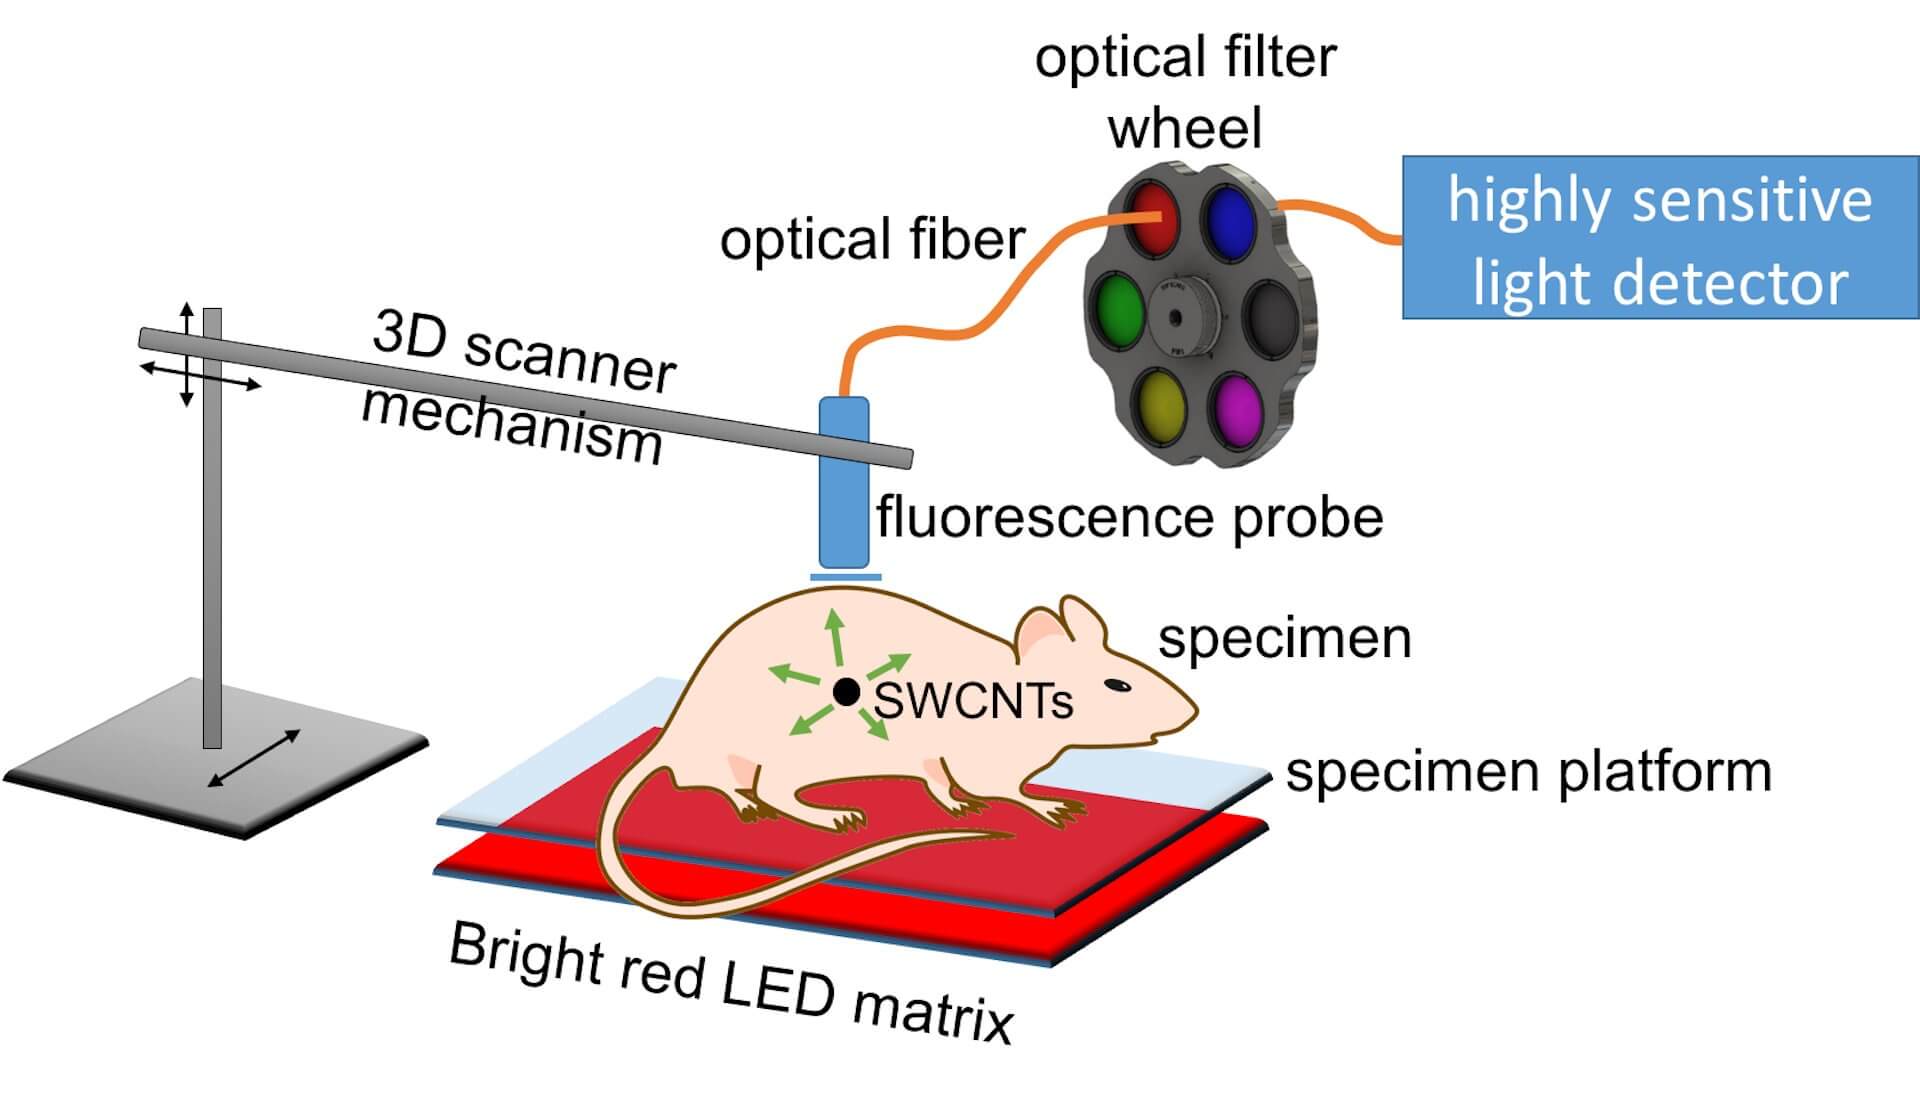 A new Rice University method for medical imaging uses strong light from an LED array and an avalanche photodiode detector to pinpoint the location of tumors that have been tagged by antibody-targeted carbon nanotubes. The method can detect fluorescence from single-walled carbon nanotubes (SWCNTs) through up to 20 millimeters of tissue. (Illustration courtesy of the Weisman Lab)